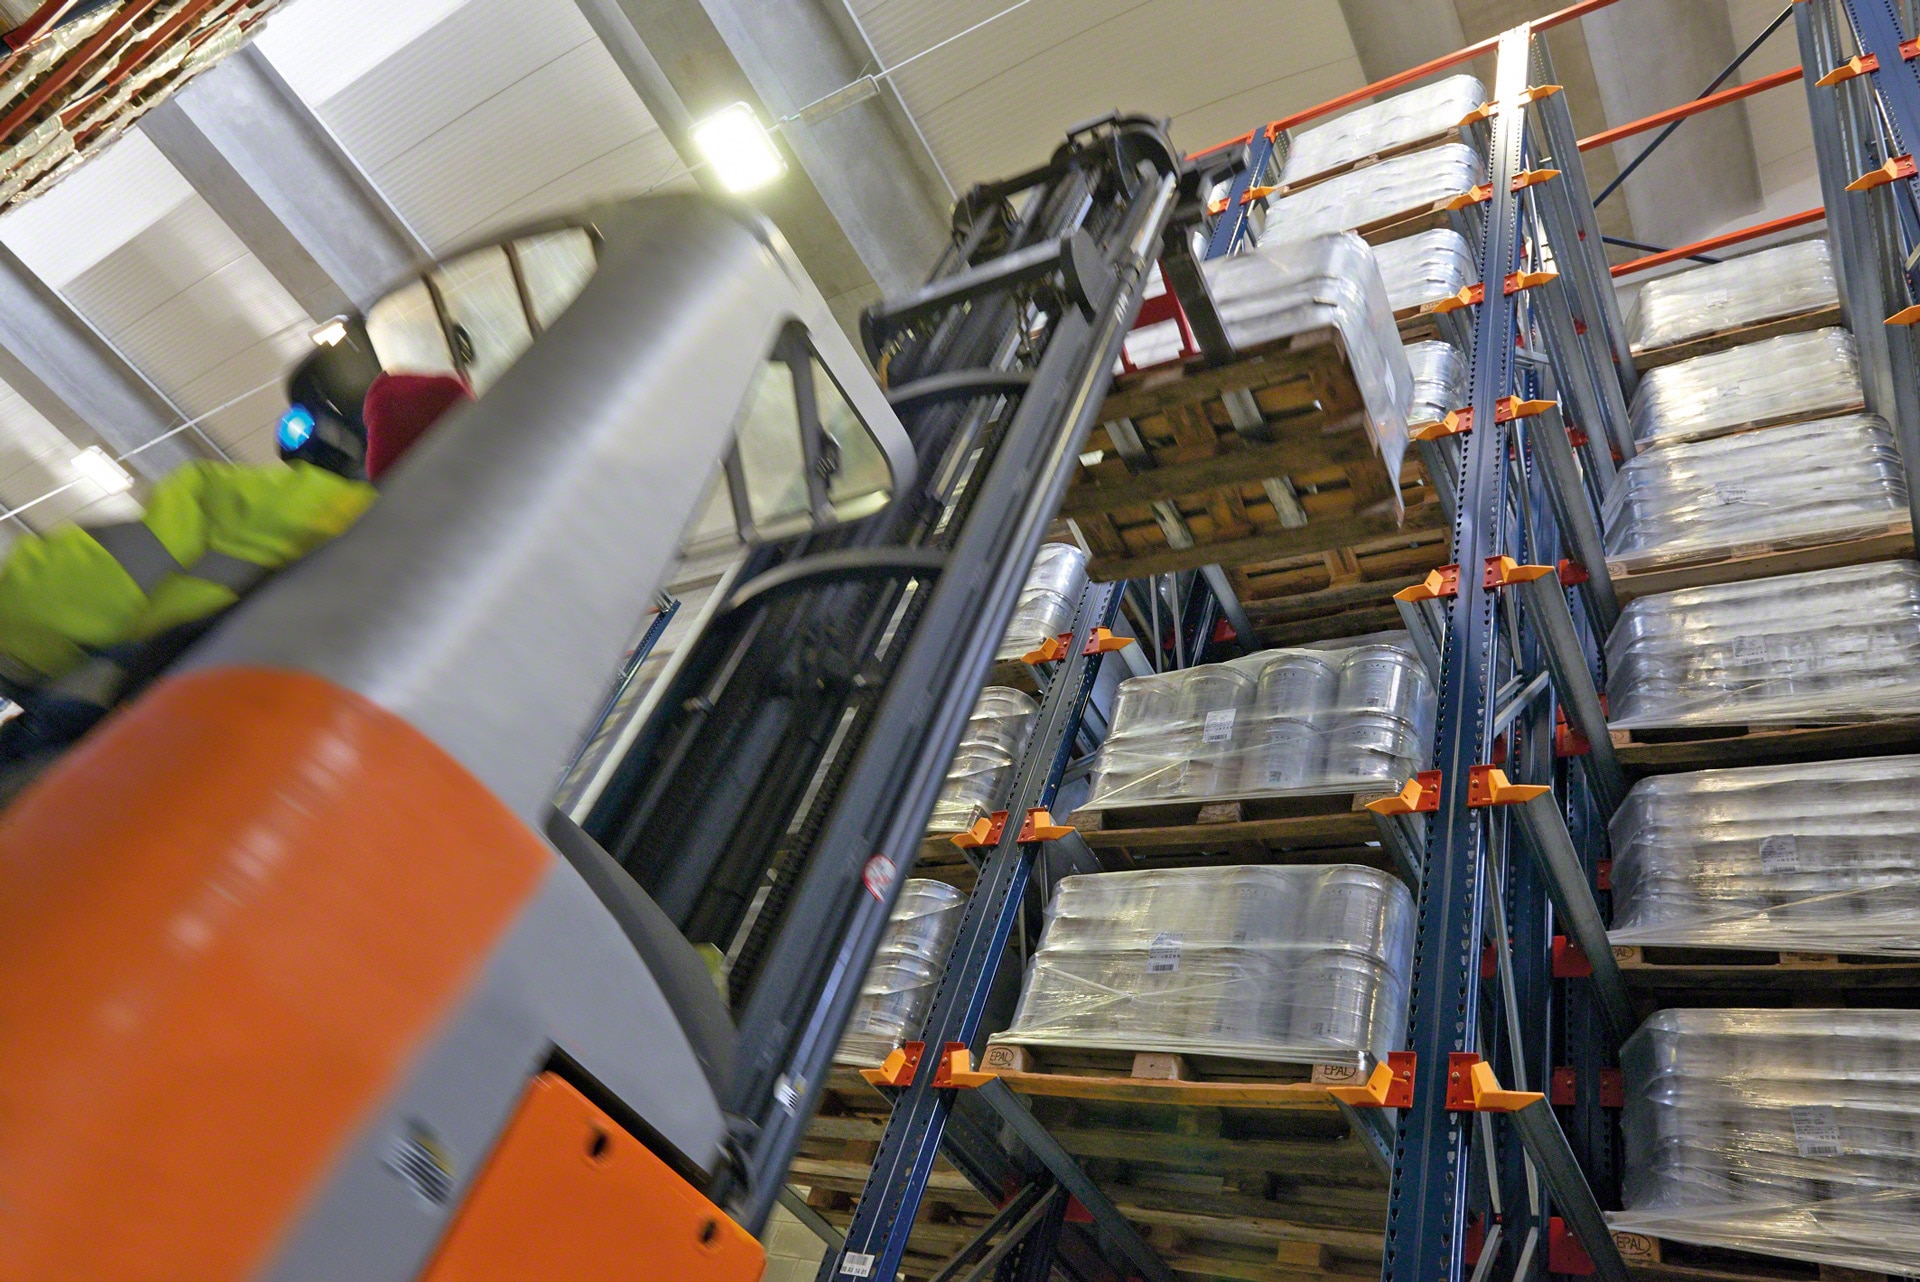 Compact racks make it easier for handling equipment to load and unload goods